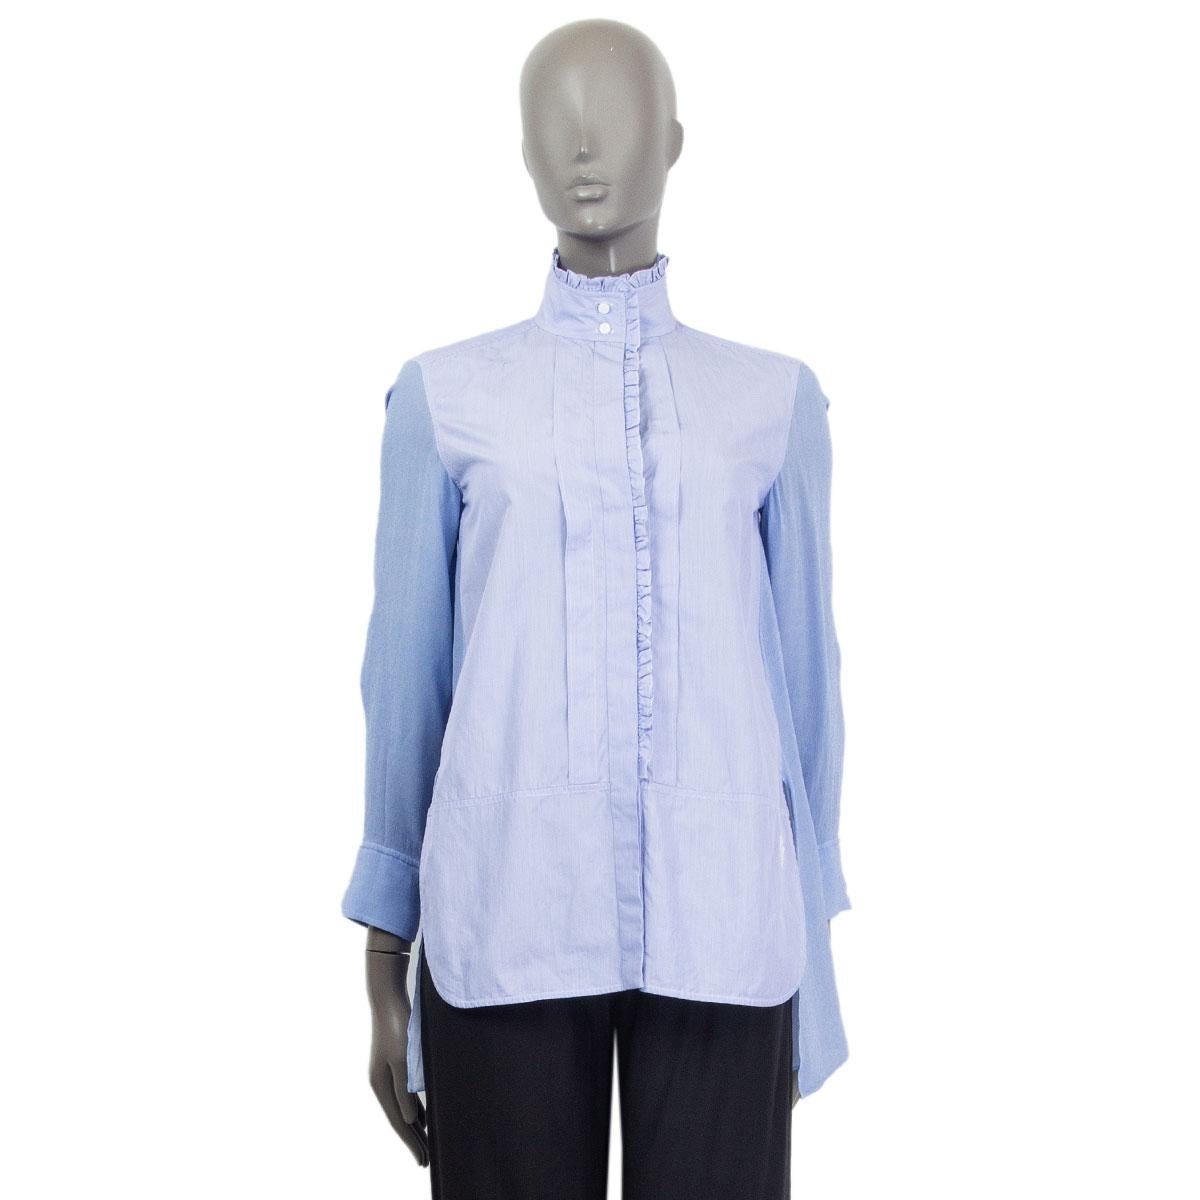 100% authentic Chloé ruched hem shirt in lavender blue striped cotton (100%) front and sleeves and back in viscose (100%). Stand-up collar and slits on the side. White C embroidery at front. Shirt is slightly longer at the back. Closes with